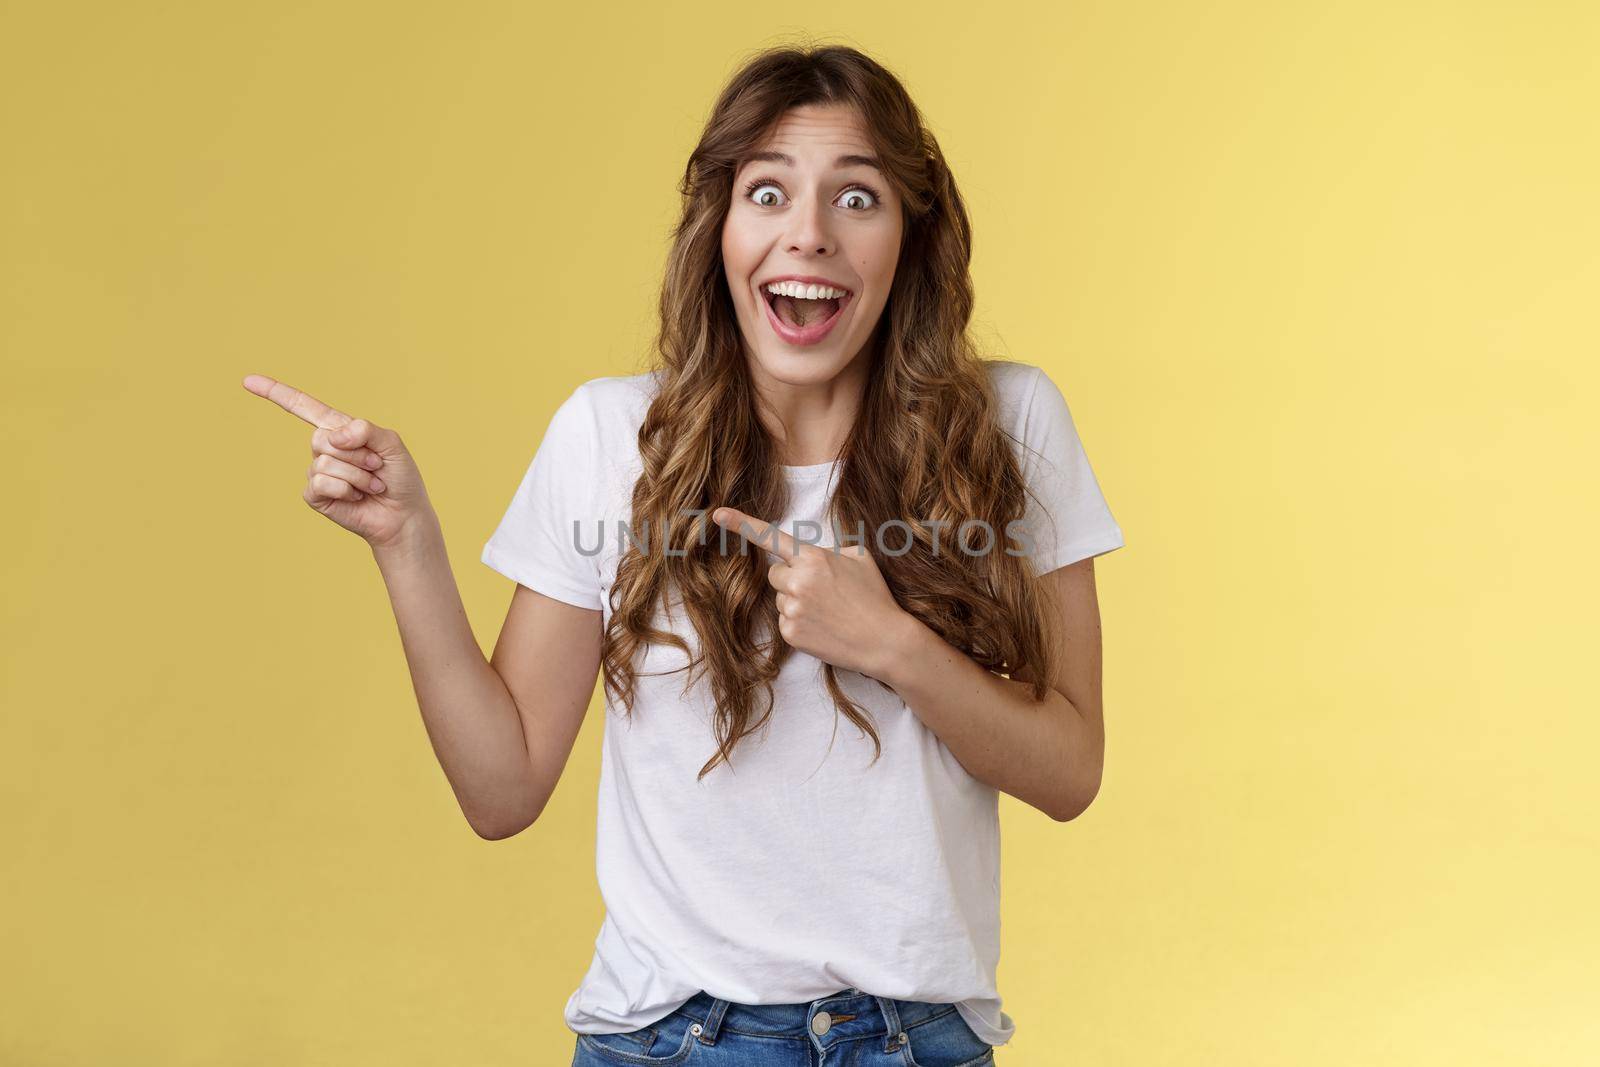 Happy sincere cheerful young surprised woman see celebrity lose speech stare excited unbelievable awesome luck fascinated pointing index fingers left open mouth stunned thrilled yellow background. Lifestyle.